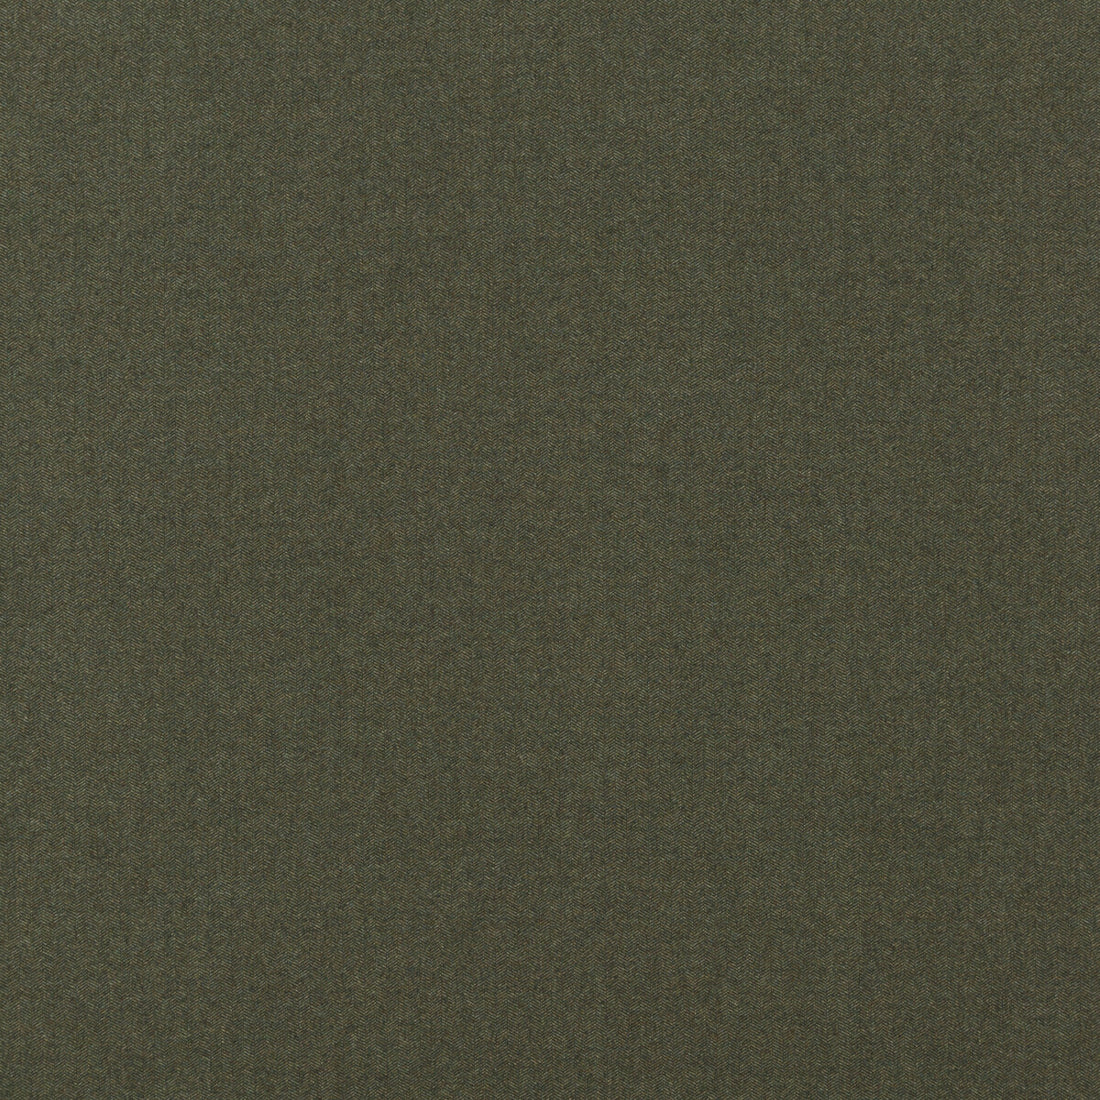 Leith fabric in forest color - pattern FD751.R106.0 - by Mulberry in the Festival collection